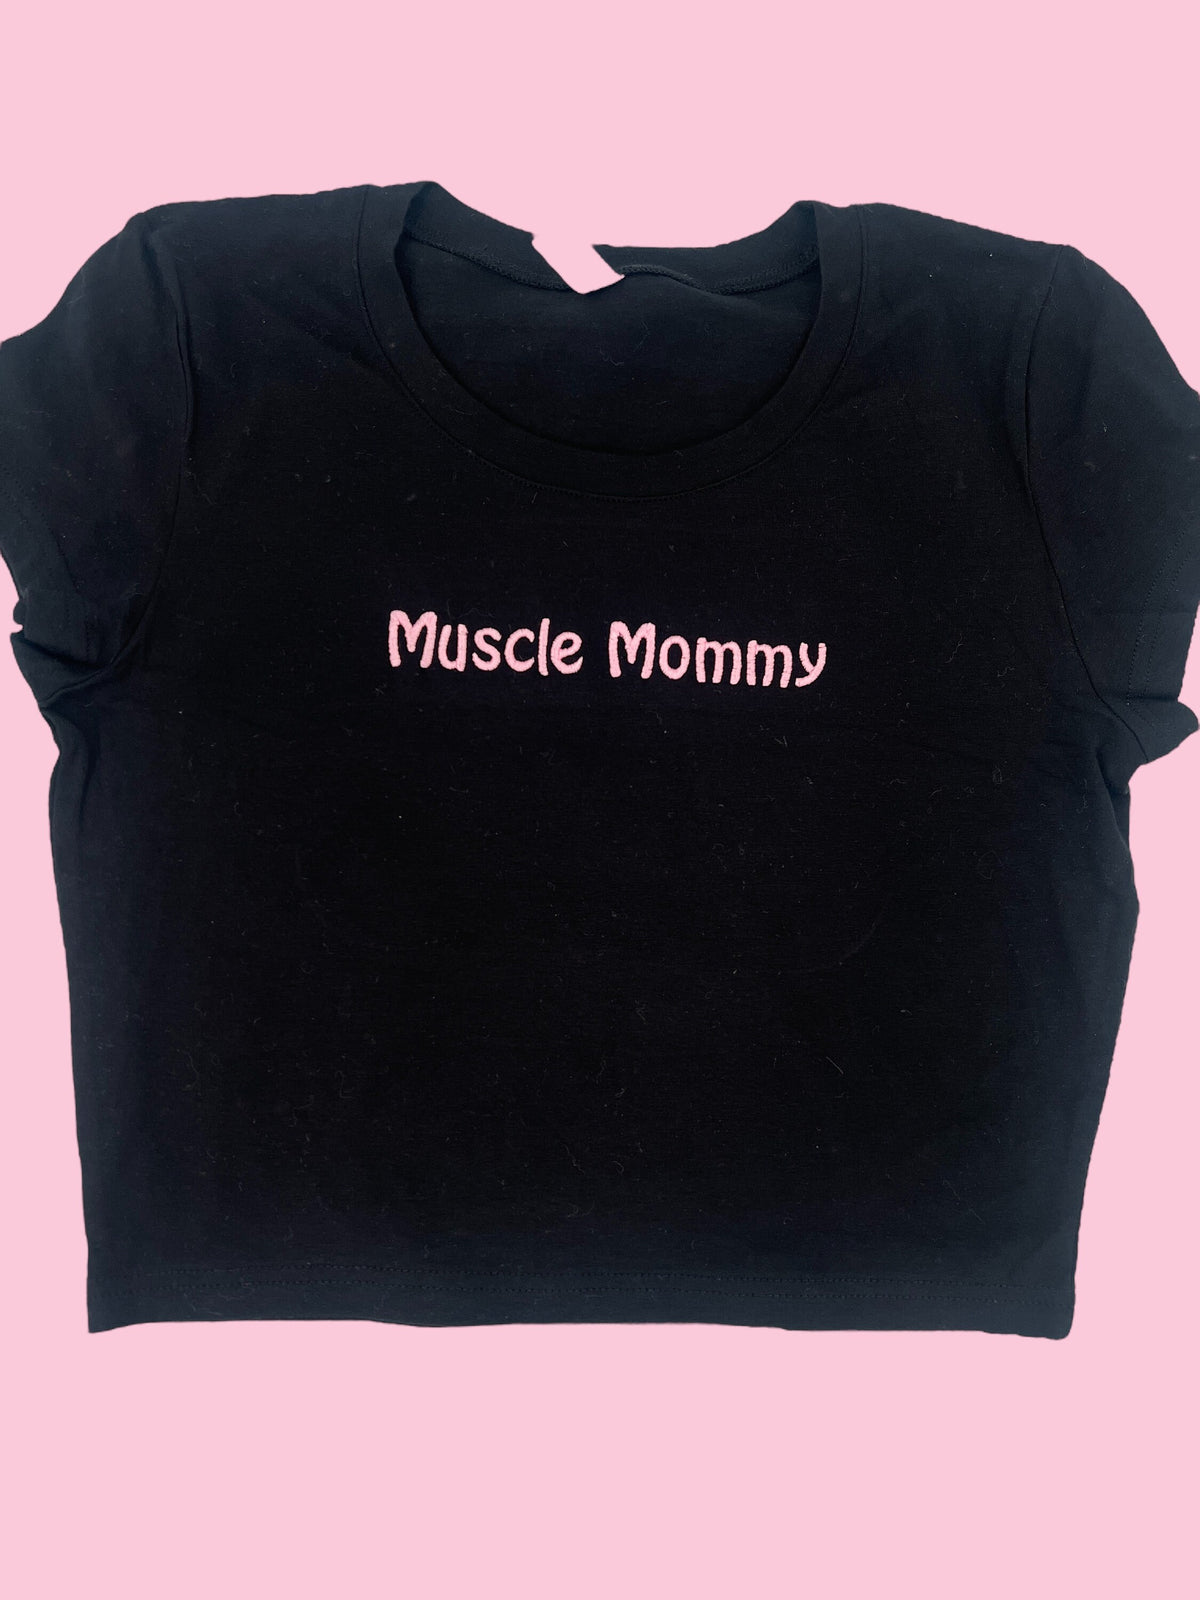 a black shirt with the words muscle mommy printed on it